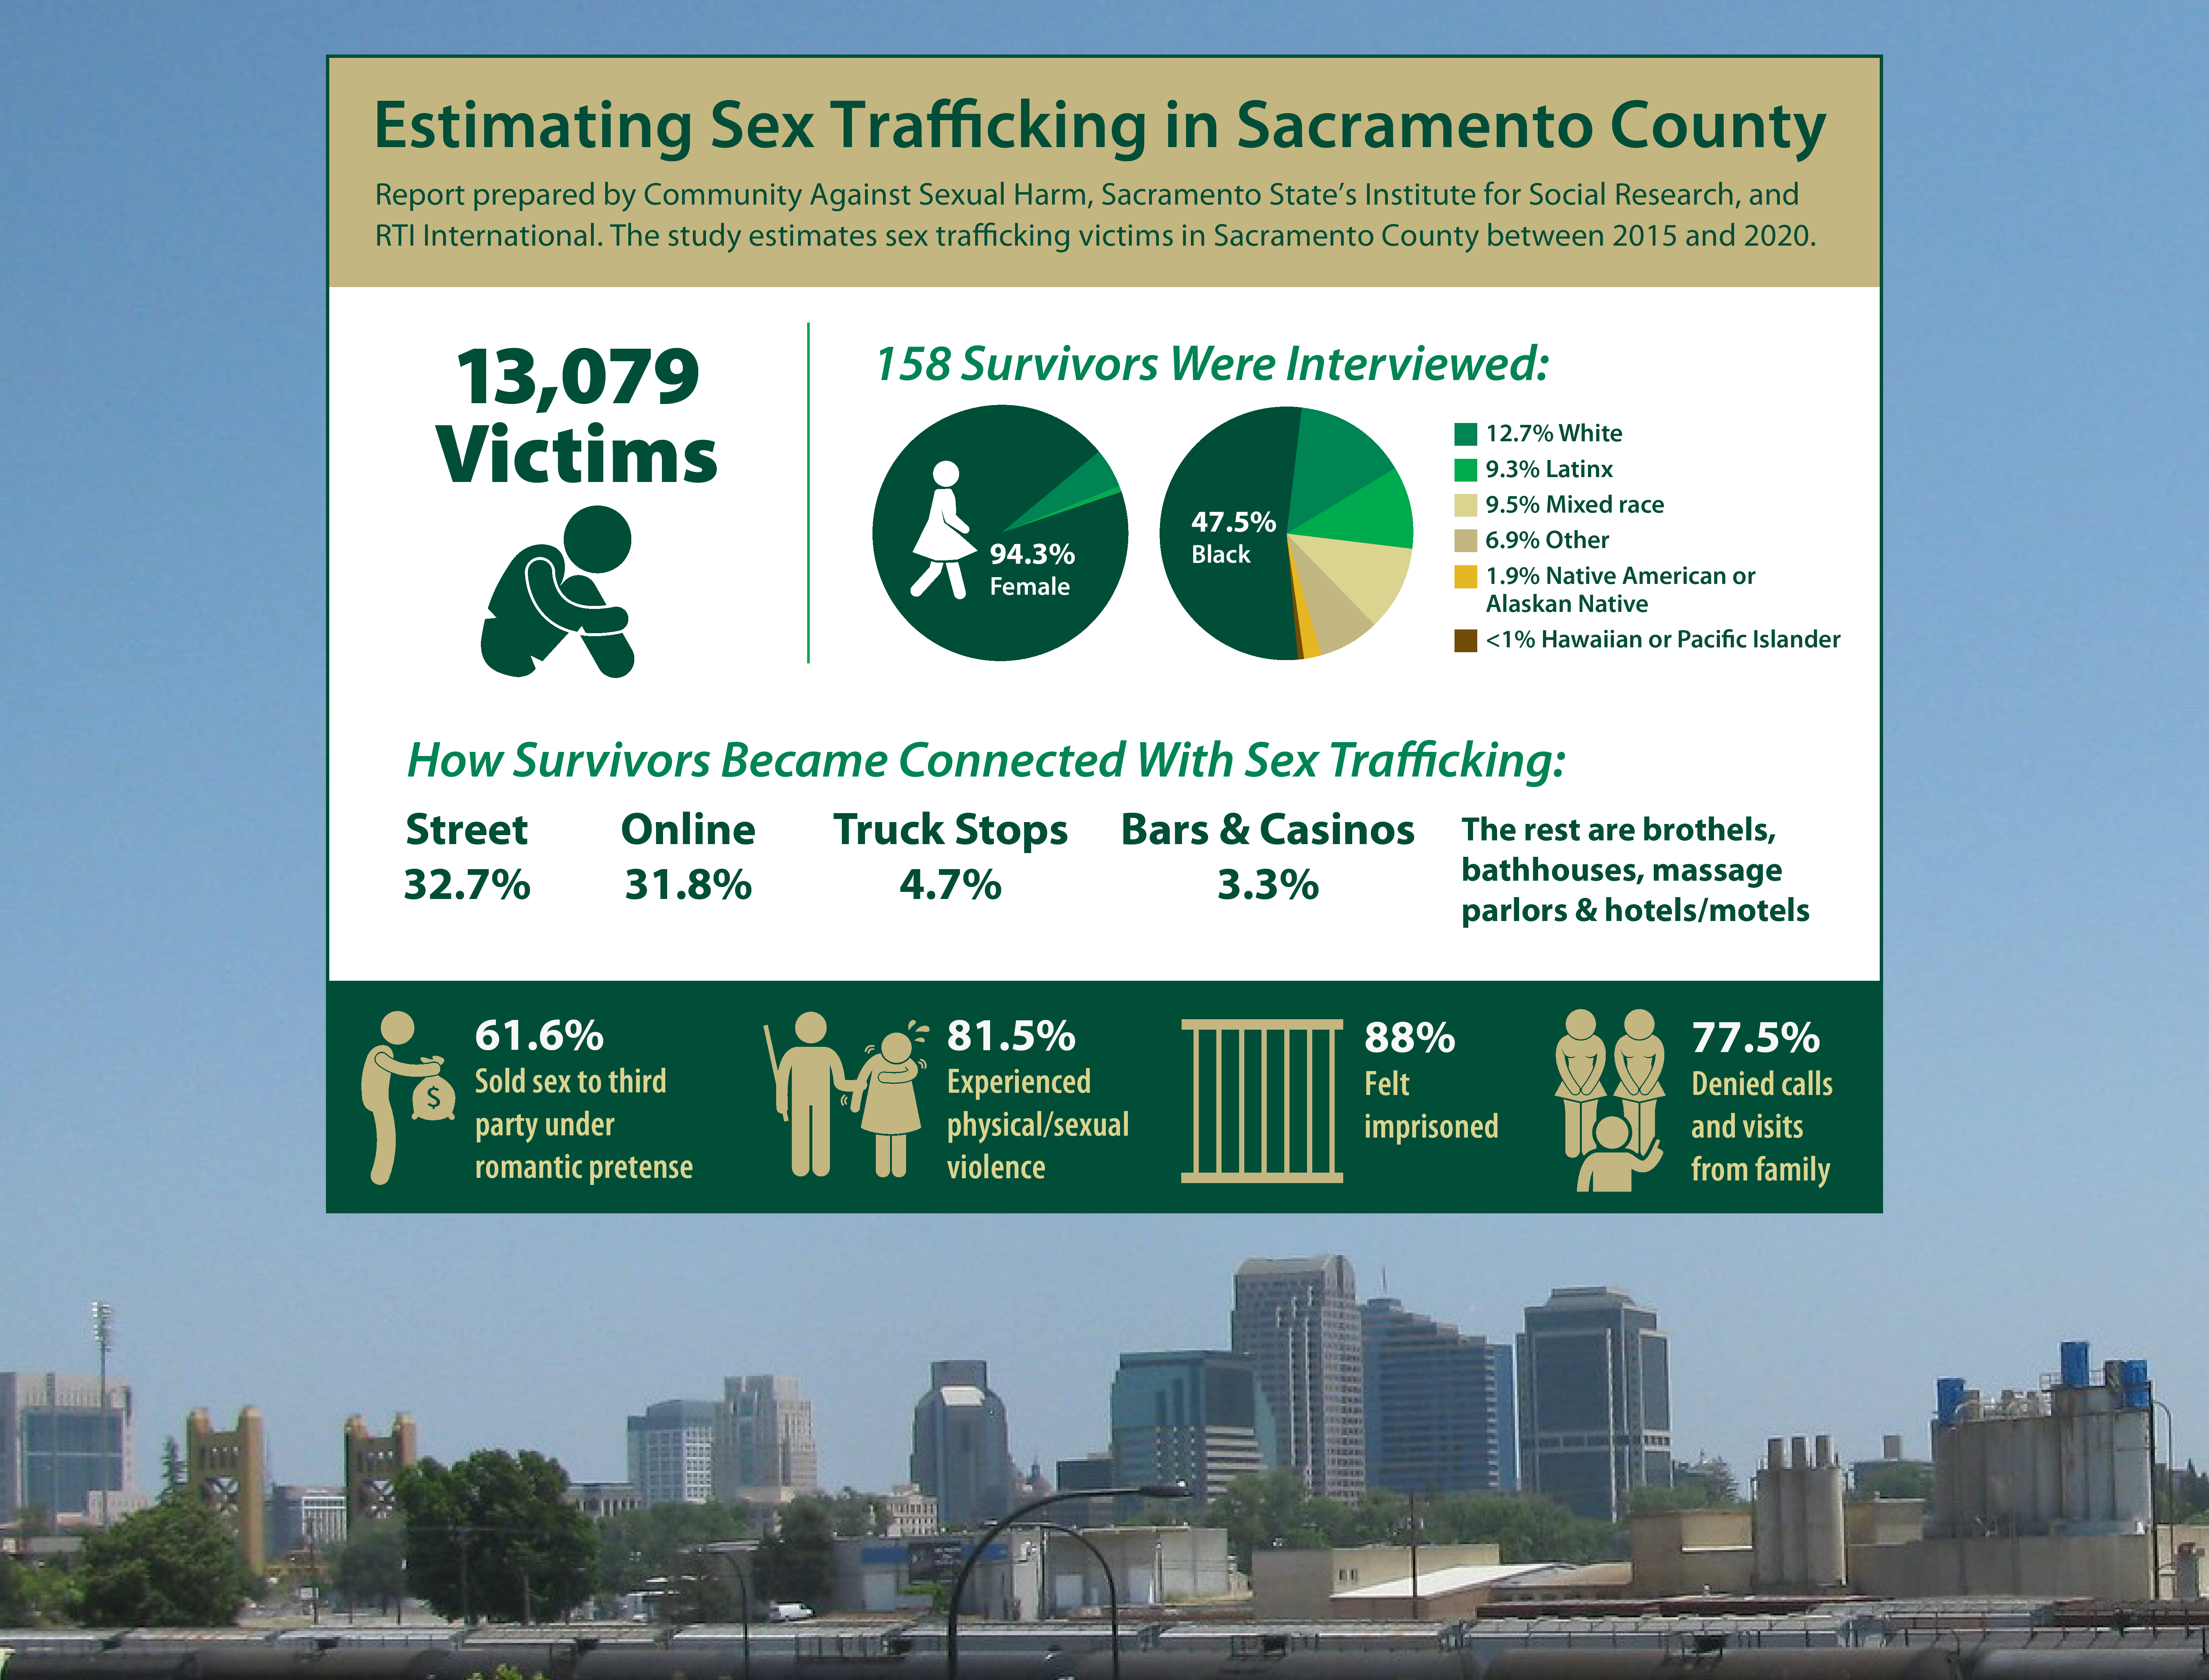 A graphic showing estimates of sex trafficking in Sacramento County features various statistics and information with a University-branded green and gold color scheme.